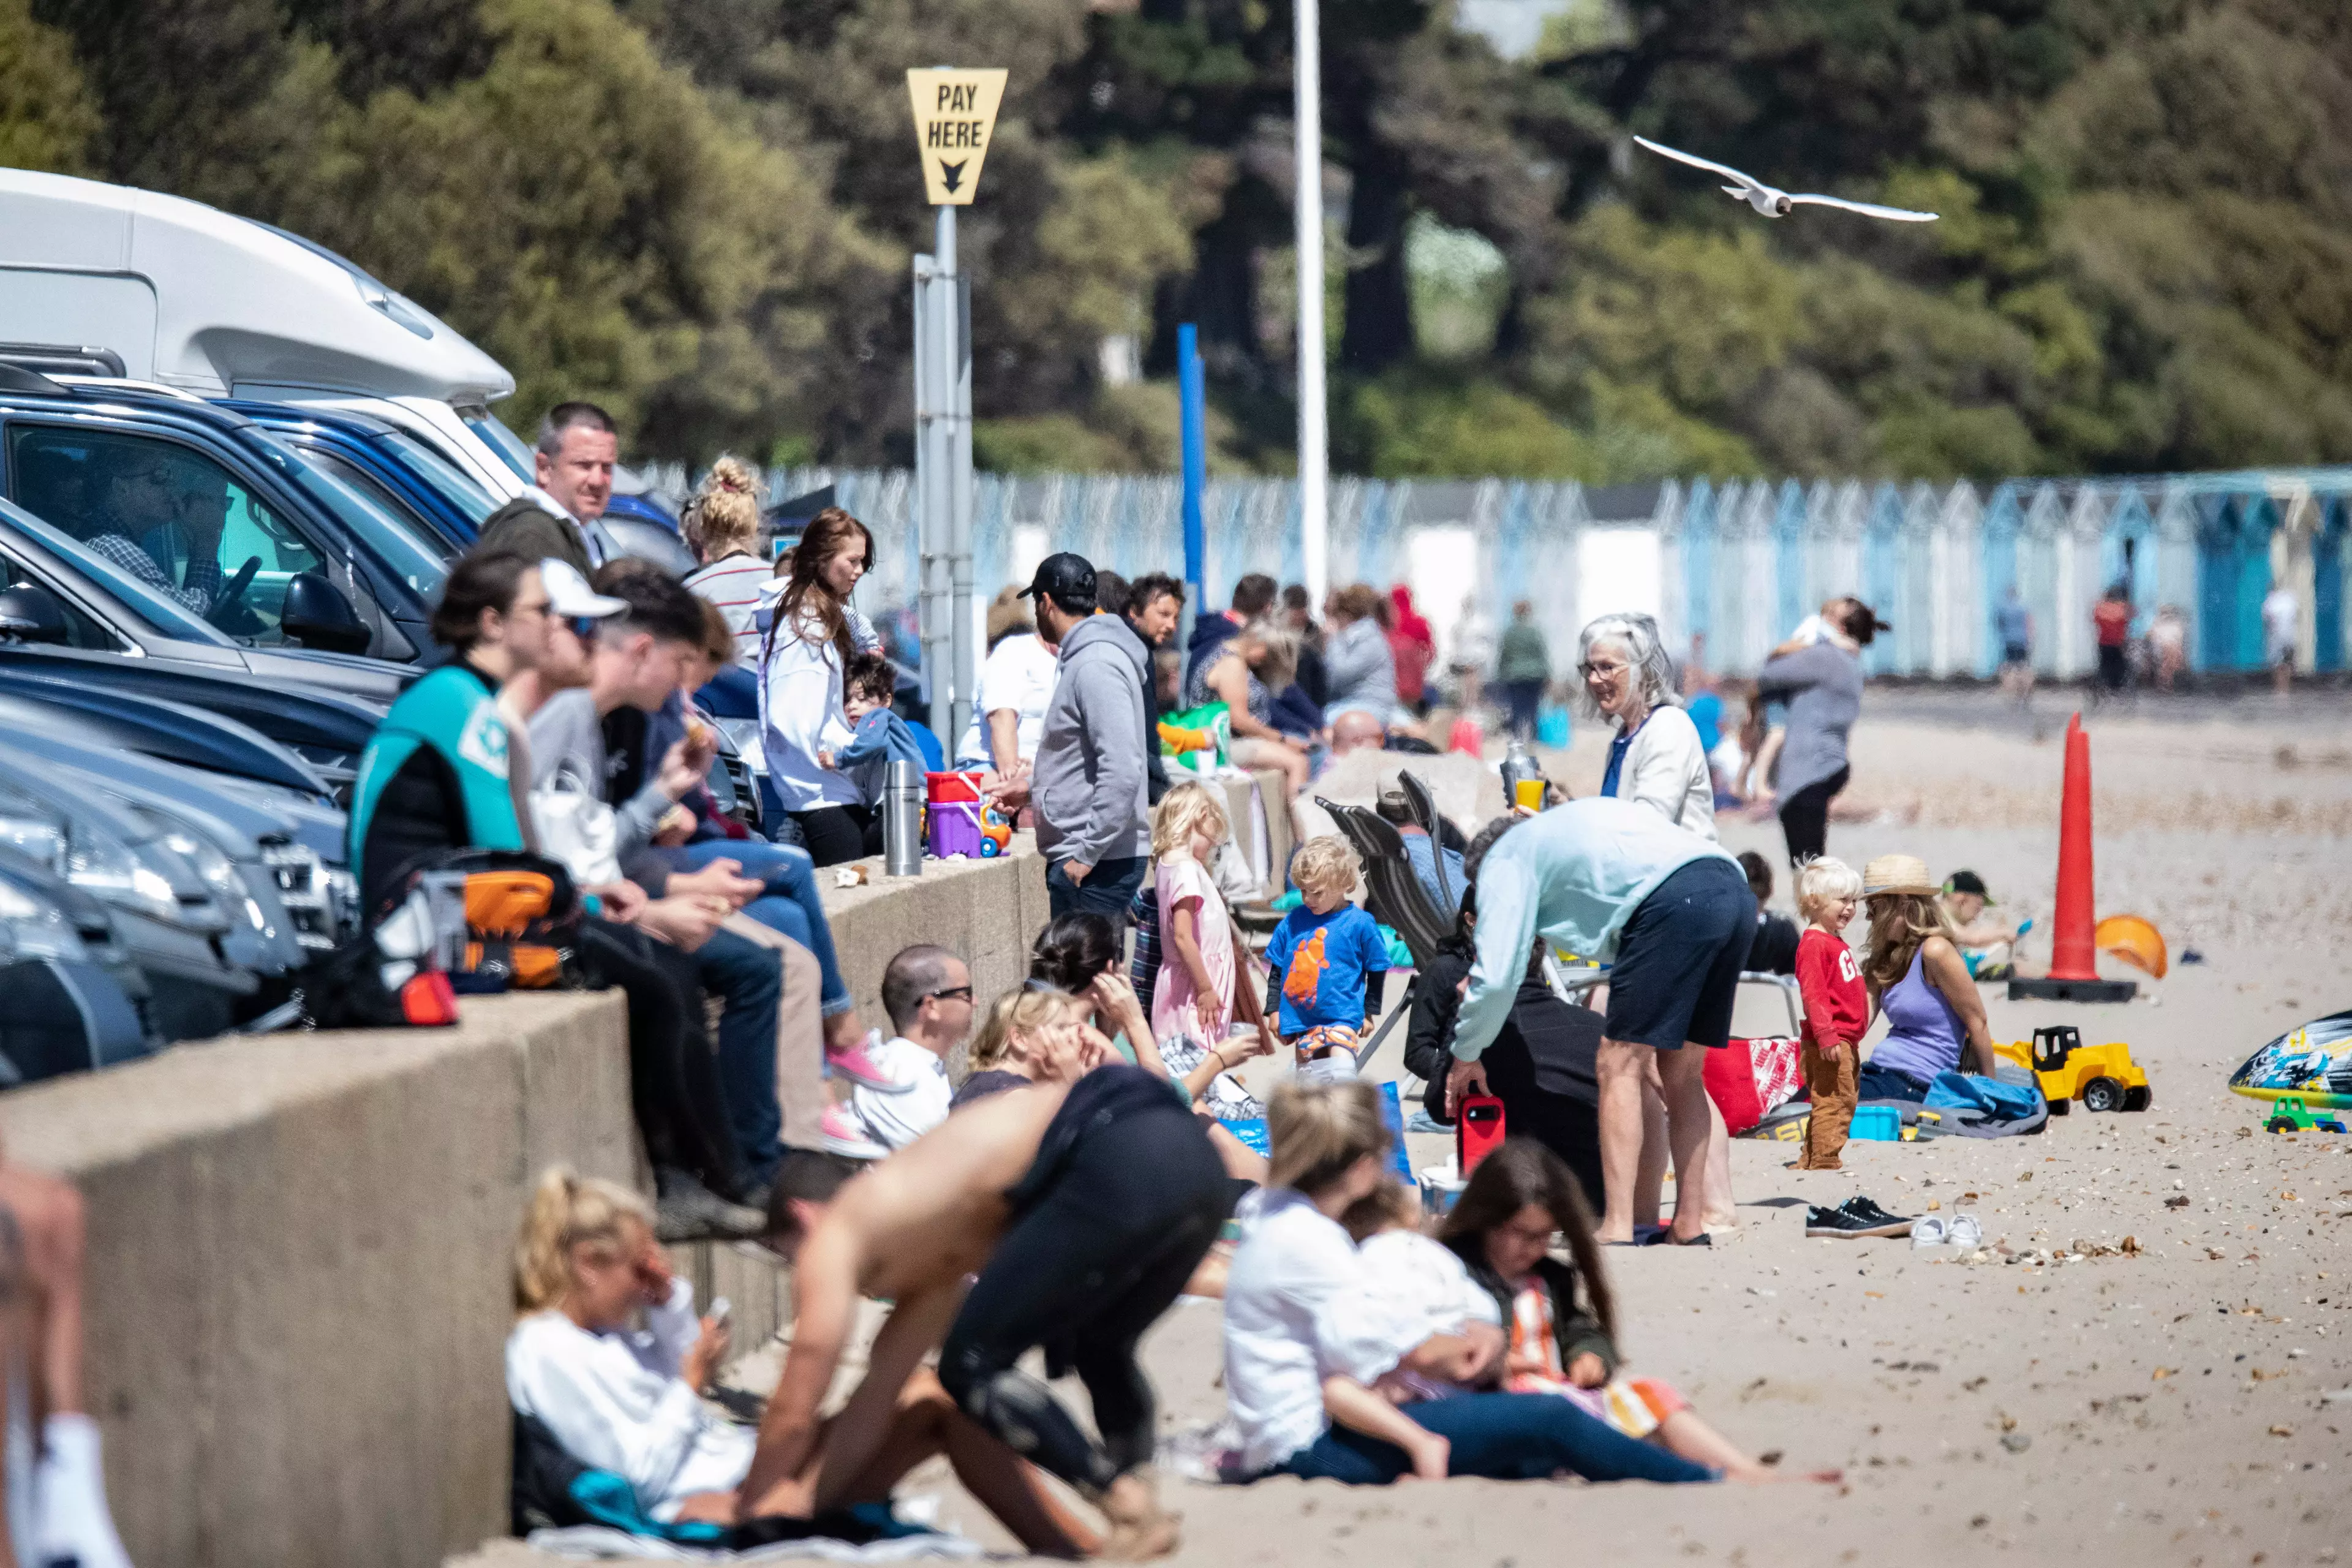 Crowds of people gathered on a sunny Bournemouth beach.